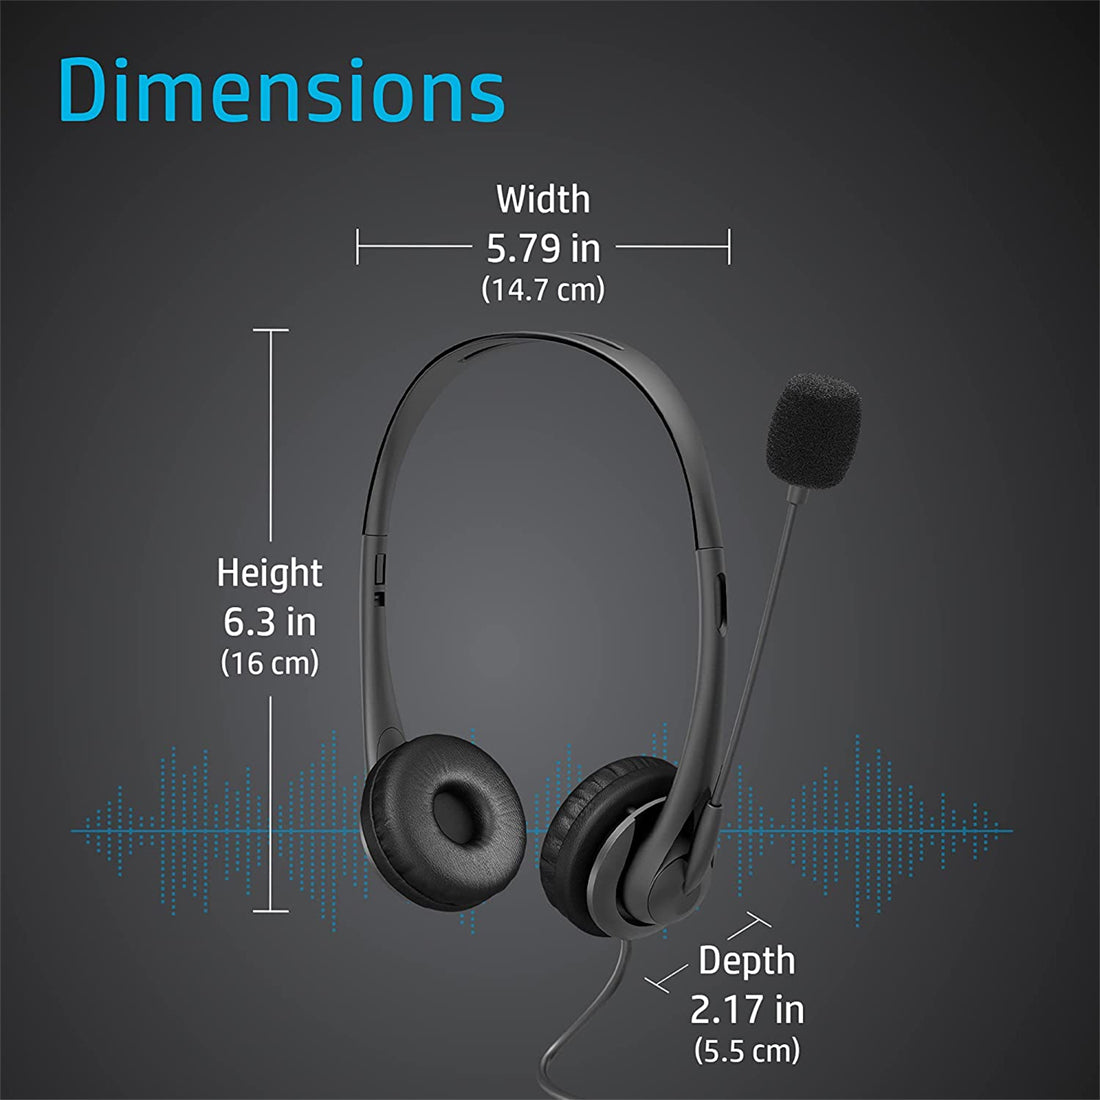 HP G2 Stereo 3.5mm Headset with Noise Cancelling and Volume Control